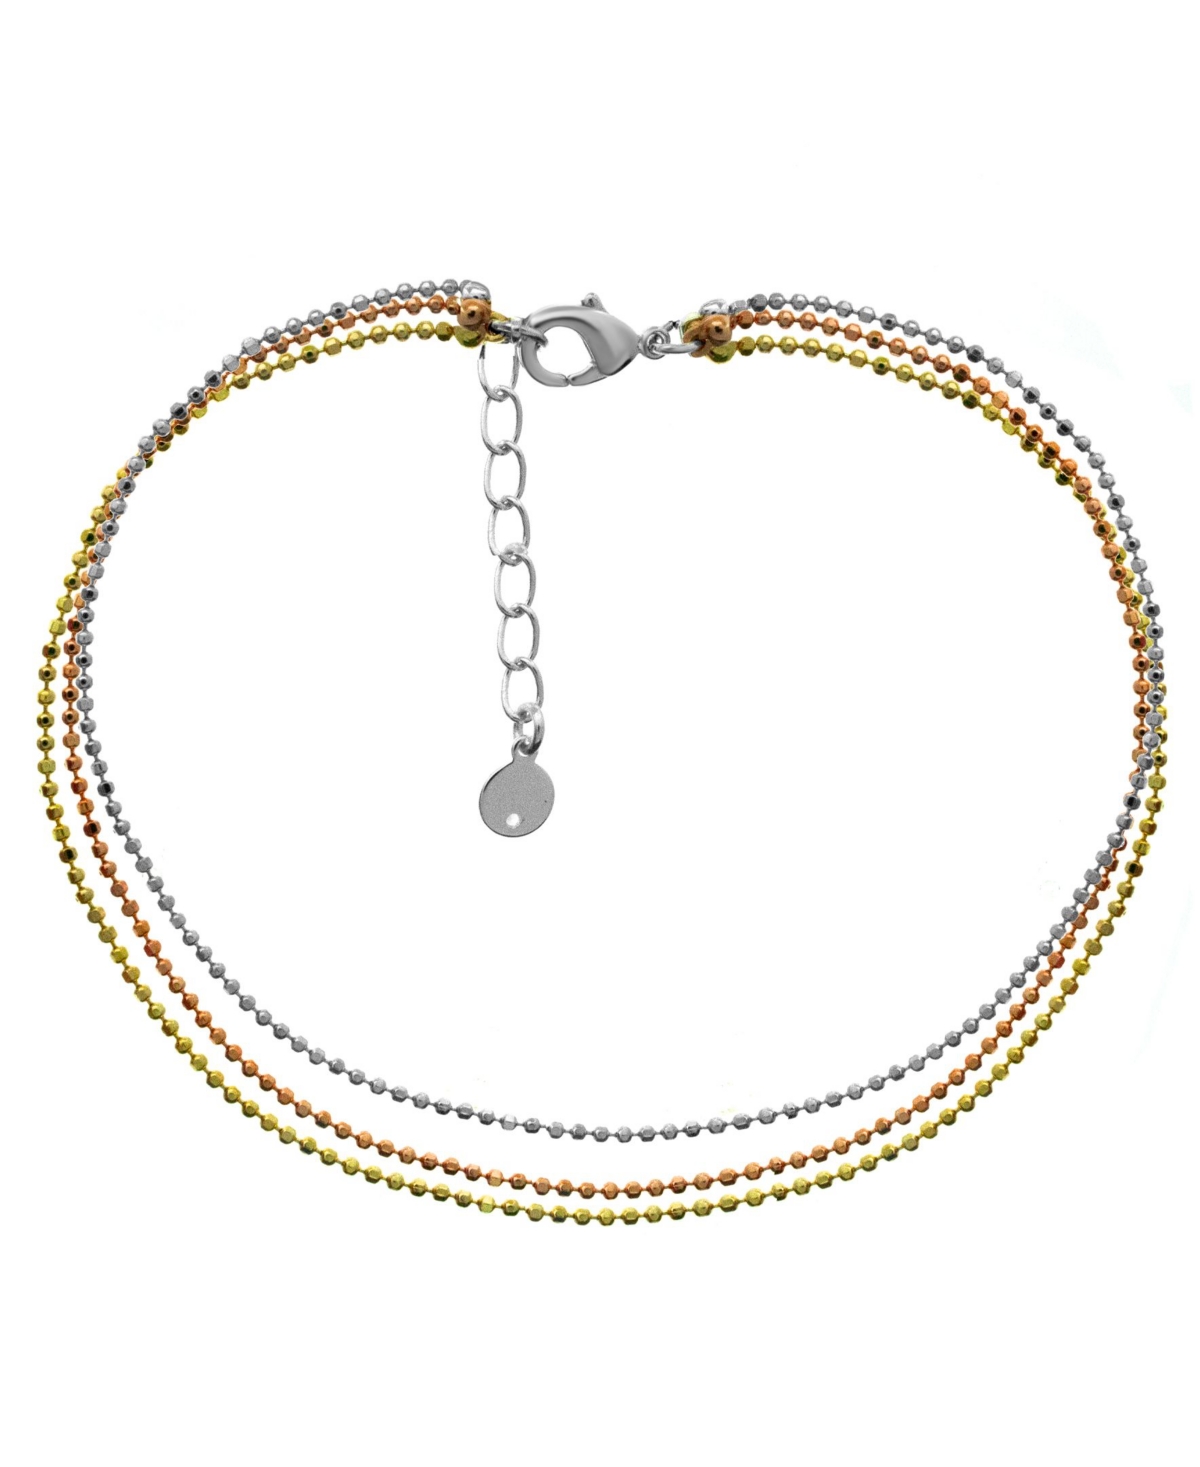 Tri Tone Layered Bead Chain Anklet - Two-Tone